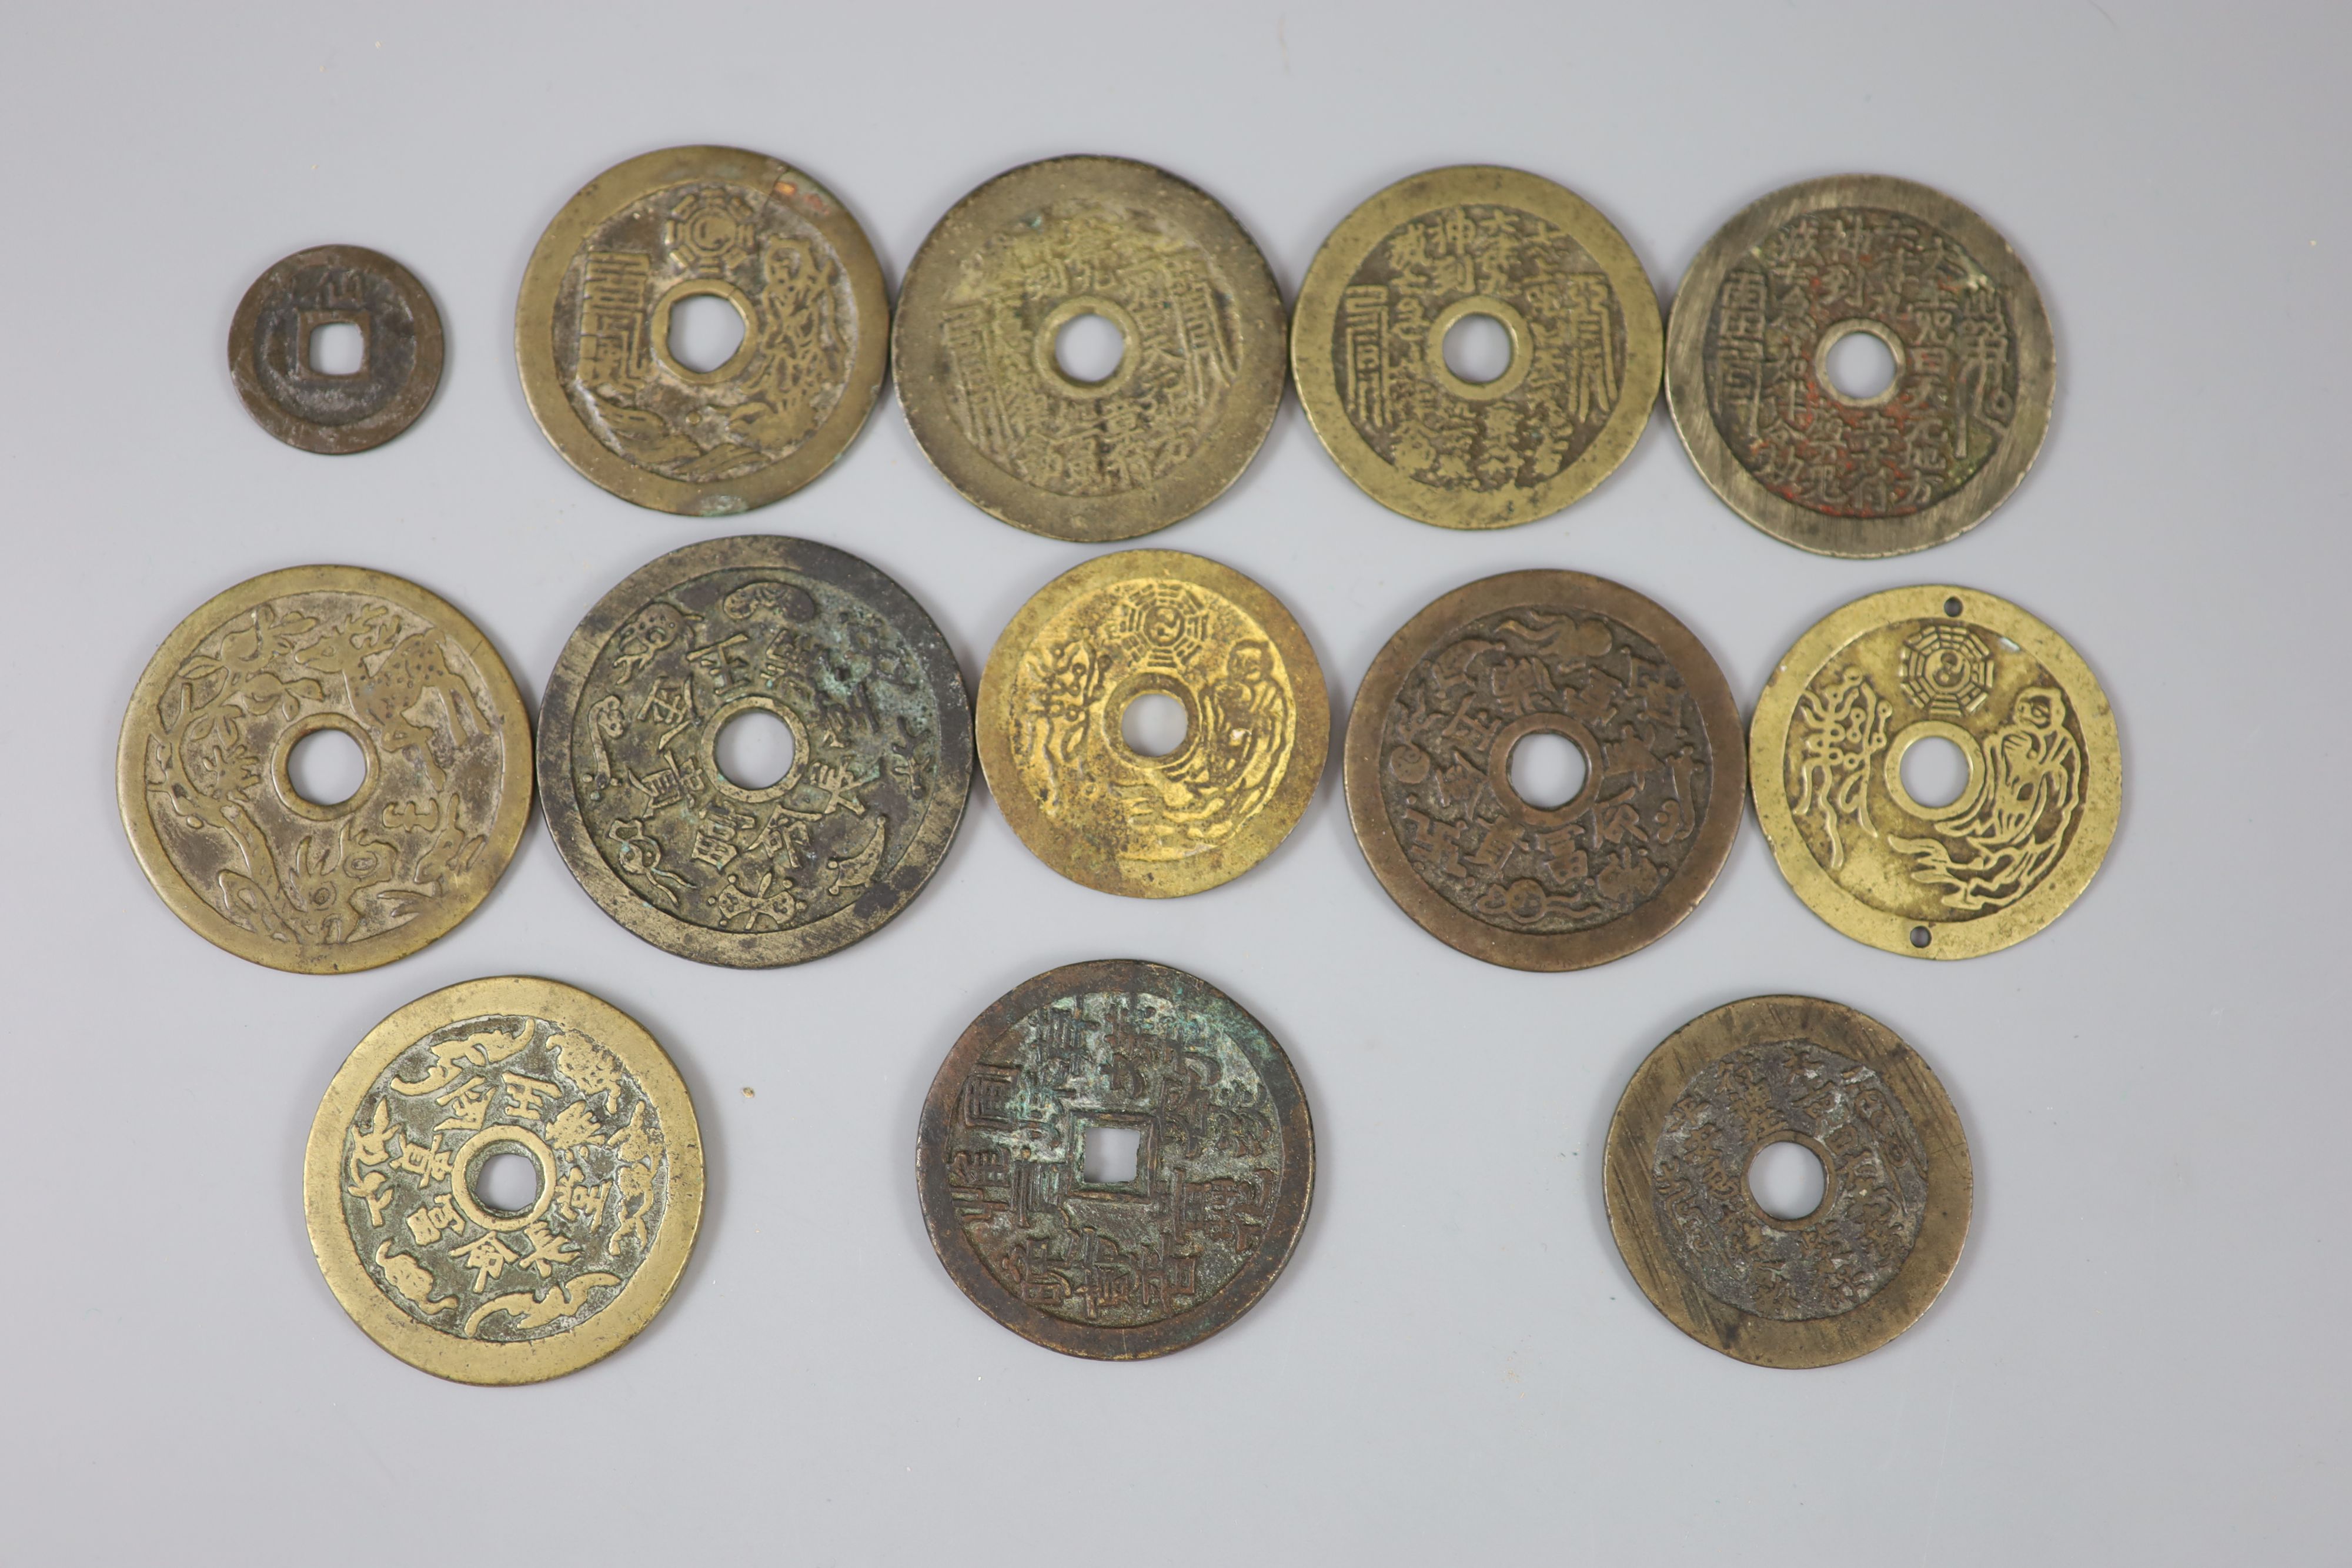 China, 12 cast bronze charms or amulets, Qing dynasty,